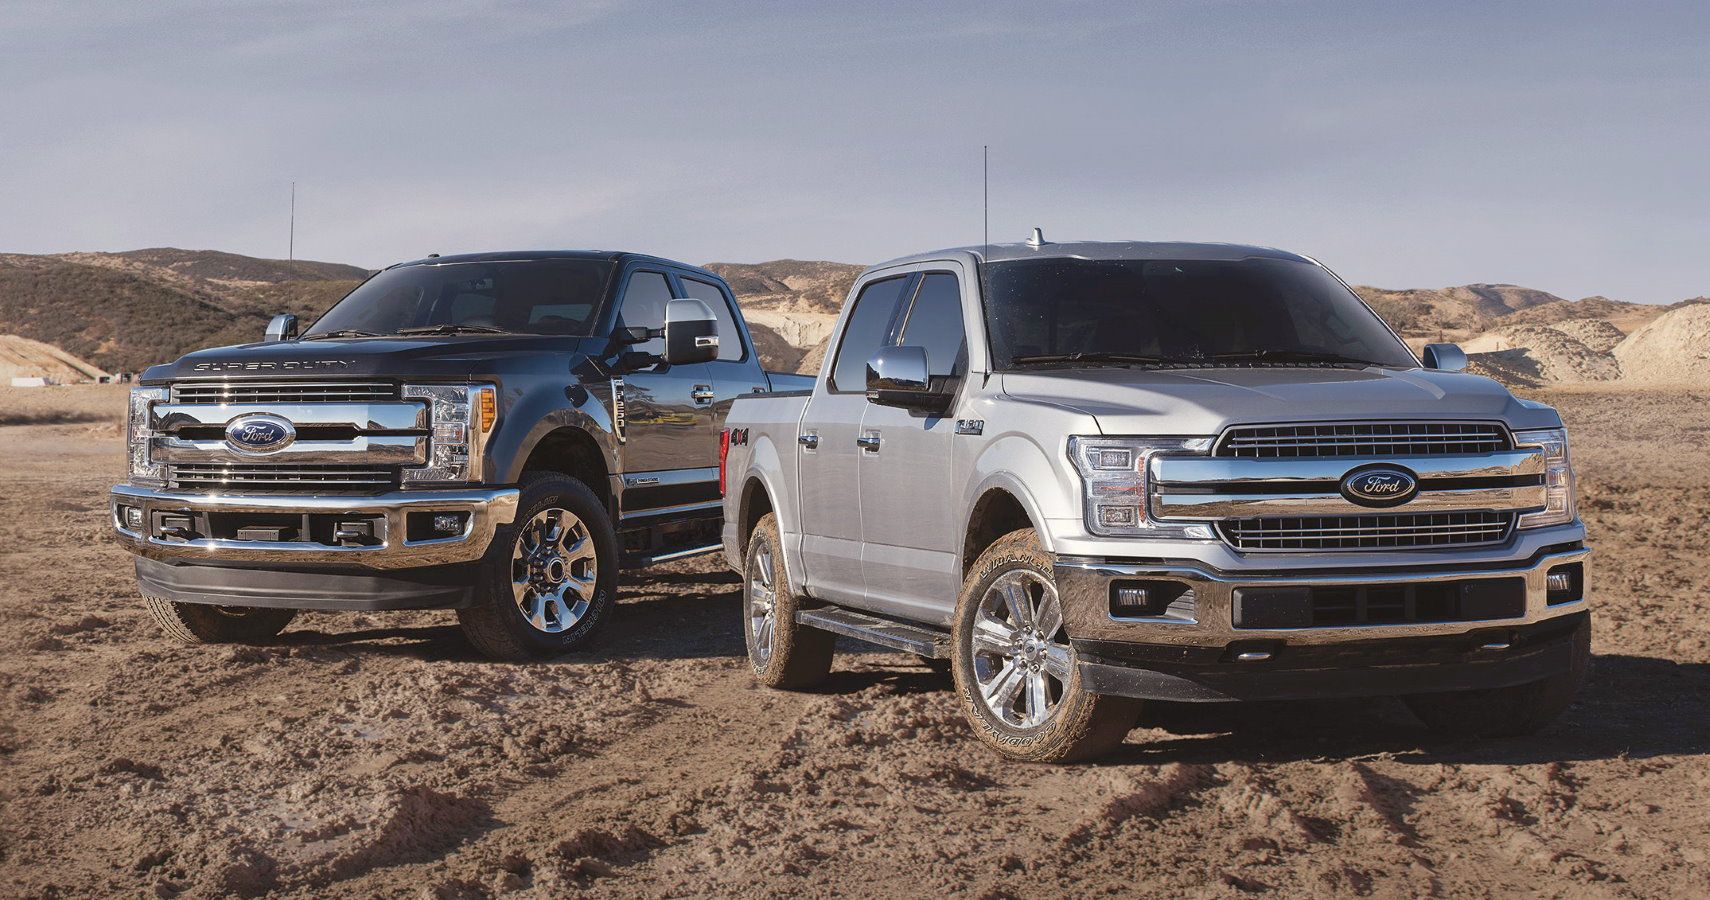 Ford sold more than 1.075 million F-Series trucks globally in 2018, averaging a sale every 29.3 seconds. Lined bumper-to-bumper, F-Series trucks would stretch more than 4,000 miles ??? greater than the distance from Dallas to Honolulu.